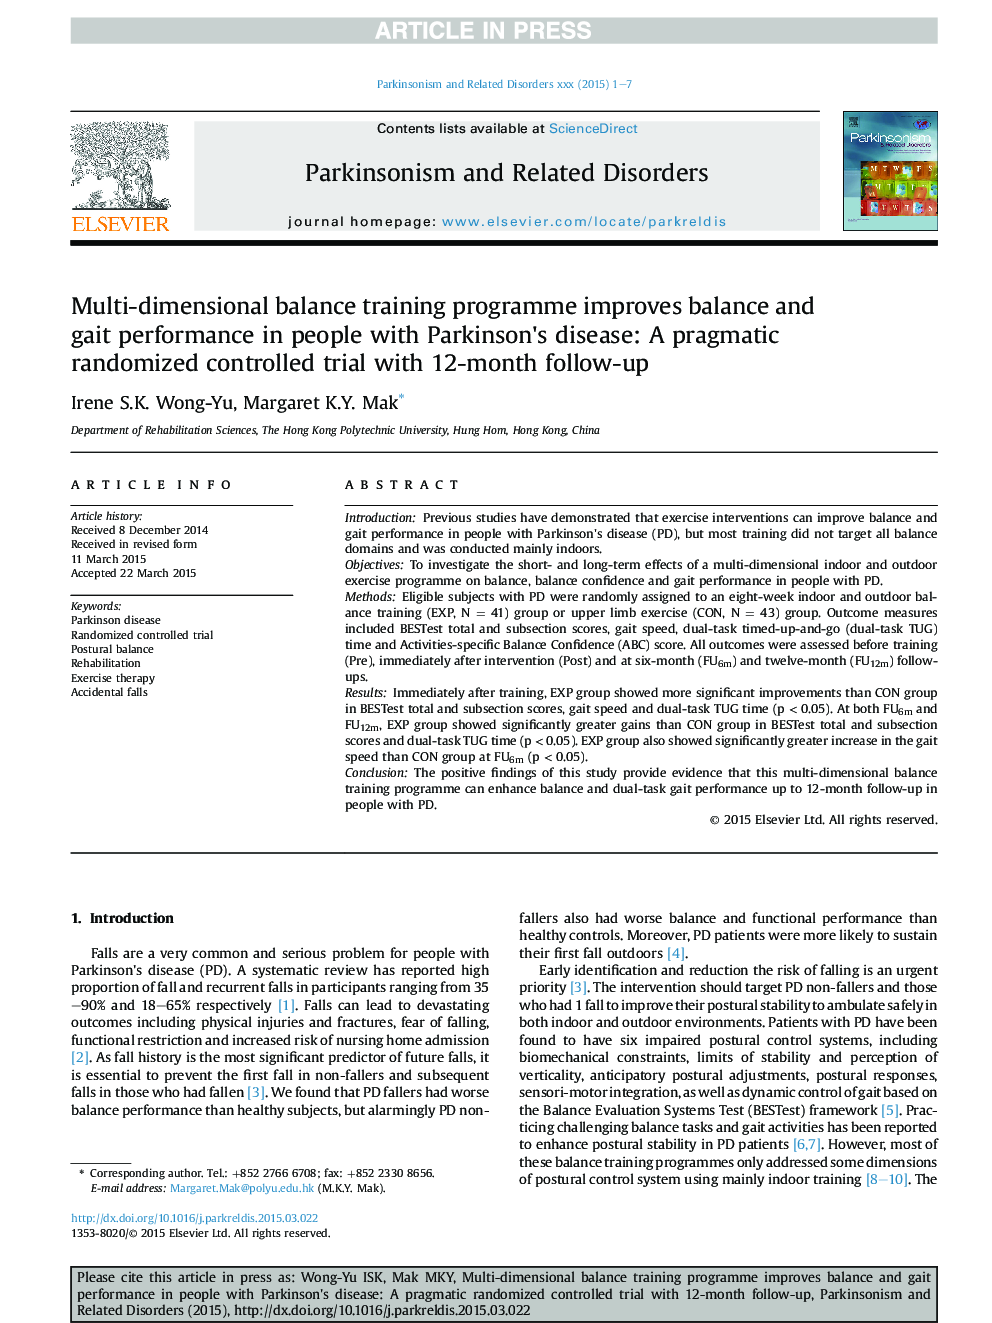 Multi-dimensional balance training programme improves balance and gait performance in people with Parkinson's disease: A pragmatic randomized controlled trial with 12-month follow-up